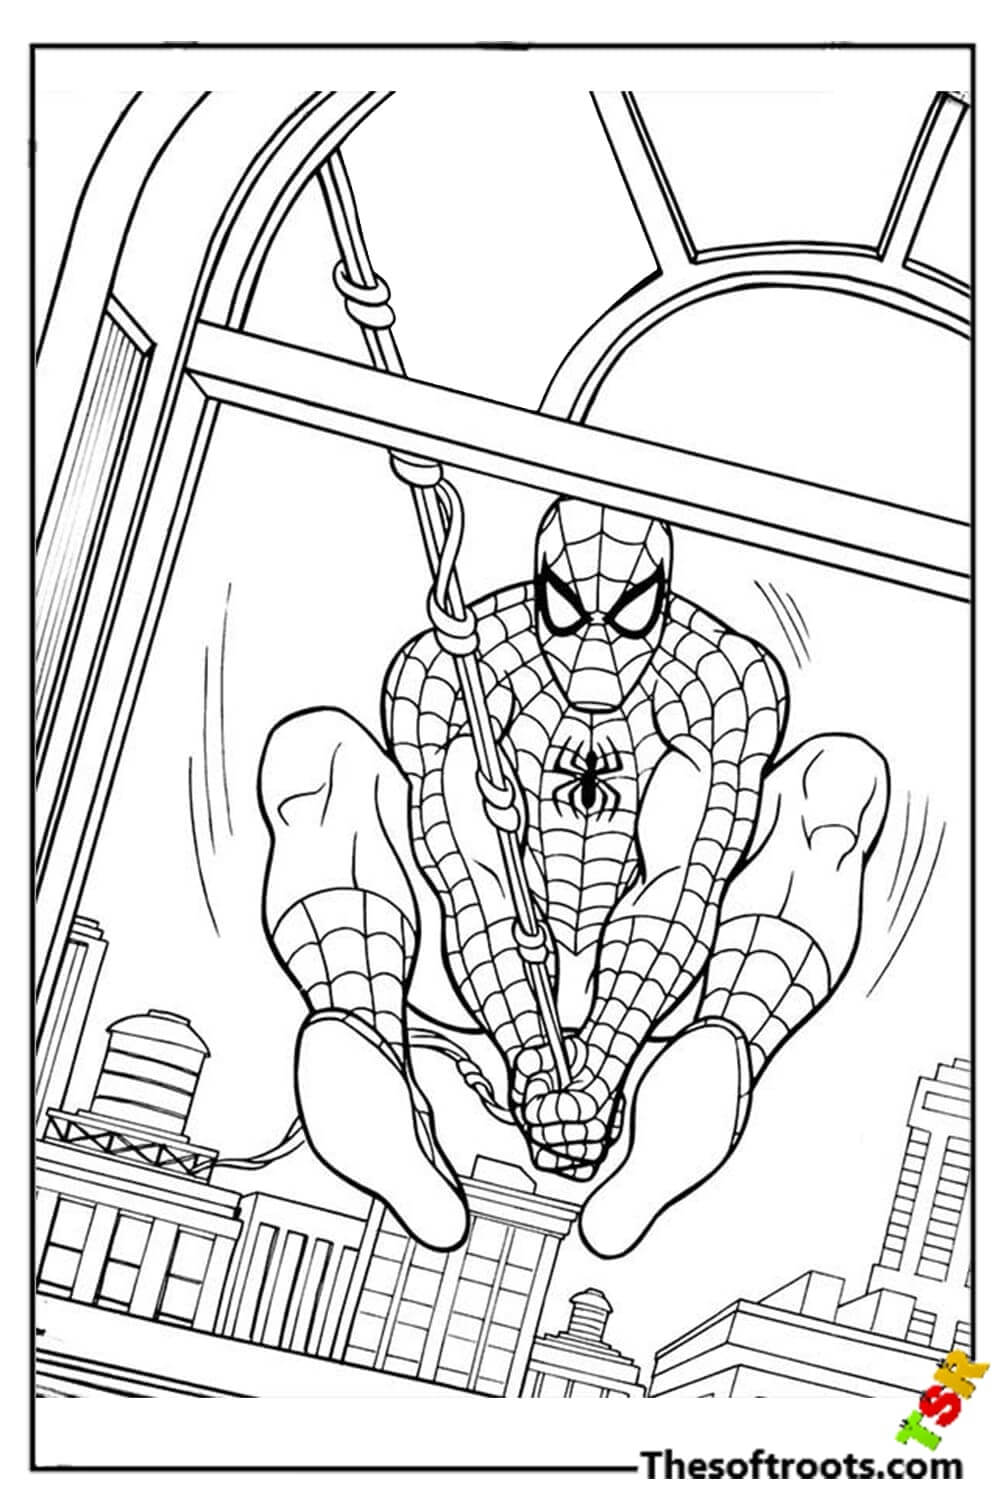 Hopping Spiderman coloring pages